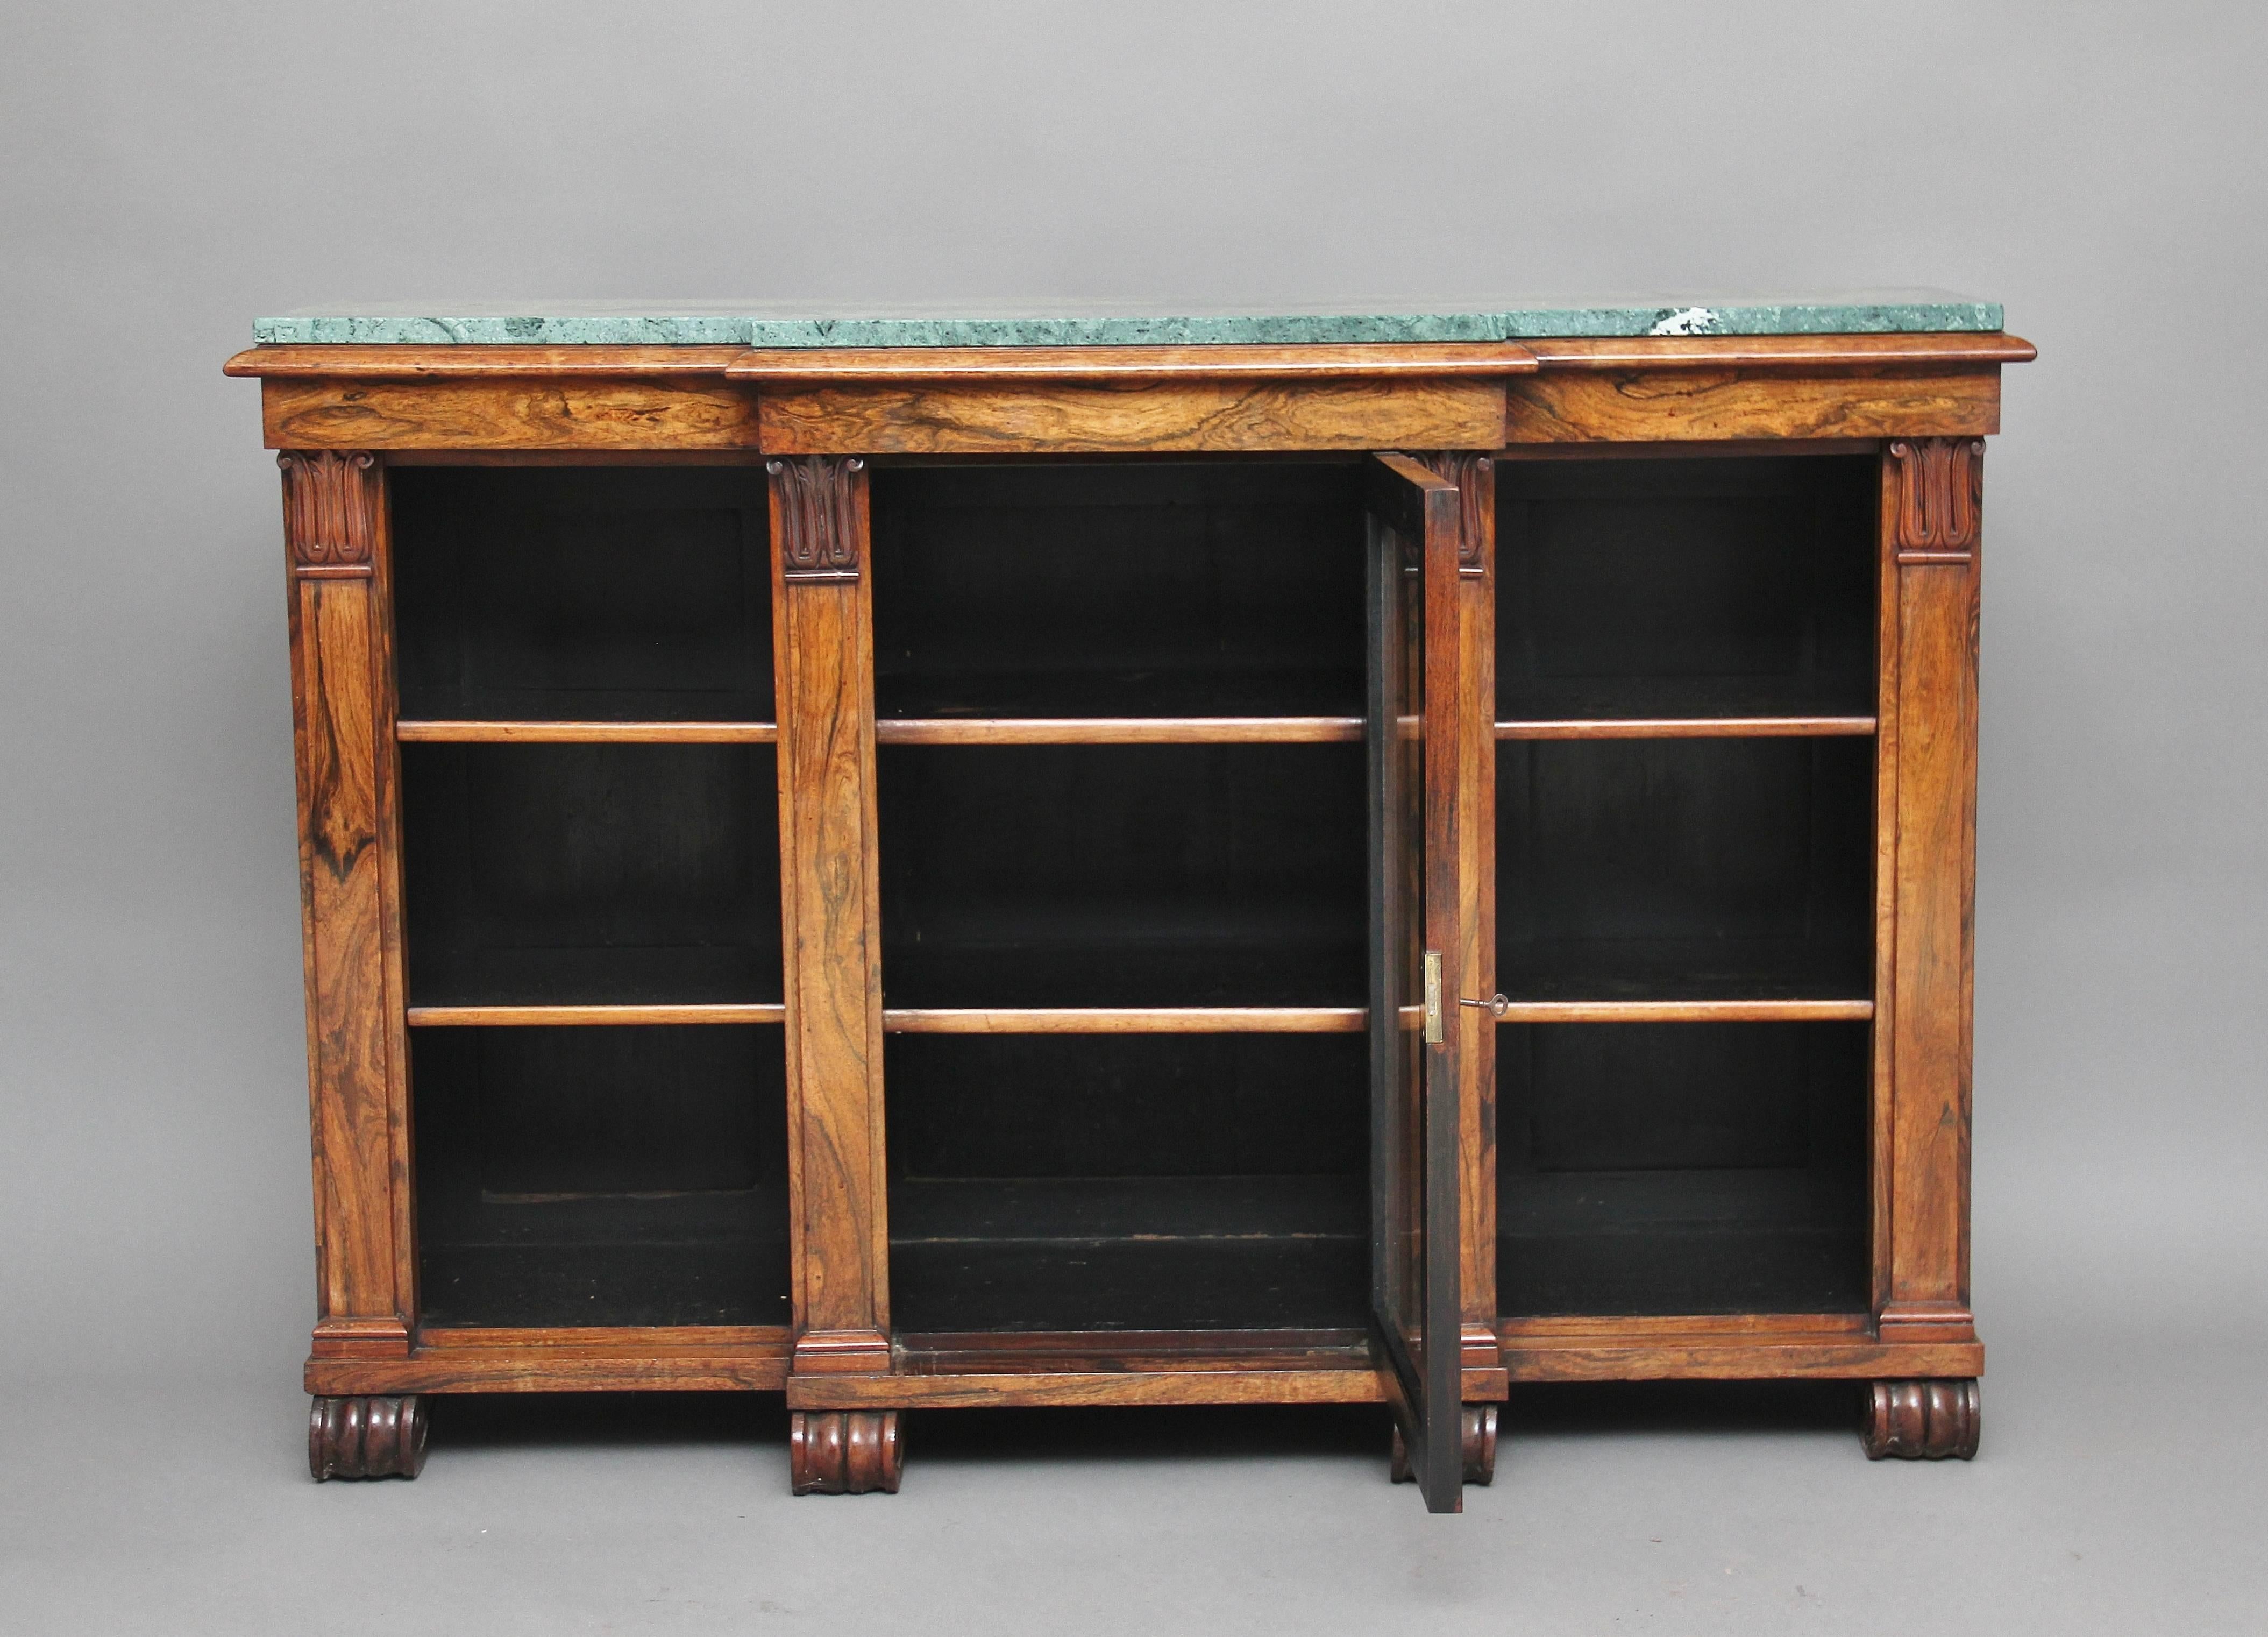 19th century rosewood breakfront bookcase or cabinet with a turquoise marble top, with a frieze below with a nice moulded edge, the cabinet having a glazed central door flanked either side by open shelves, with two shelves in each of the three